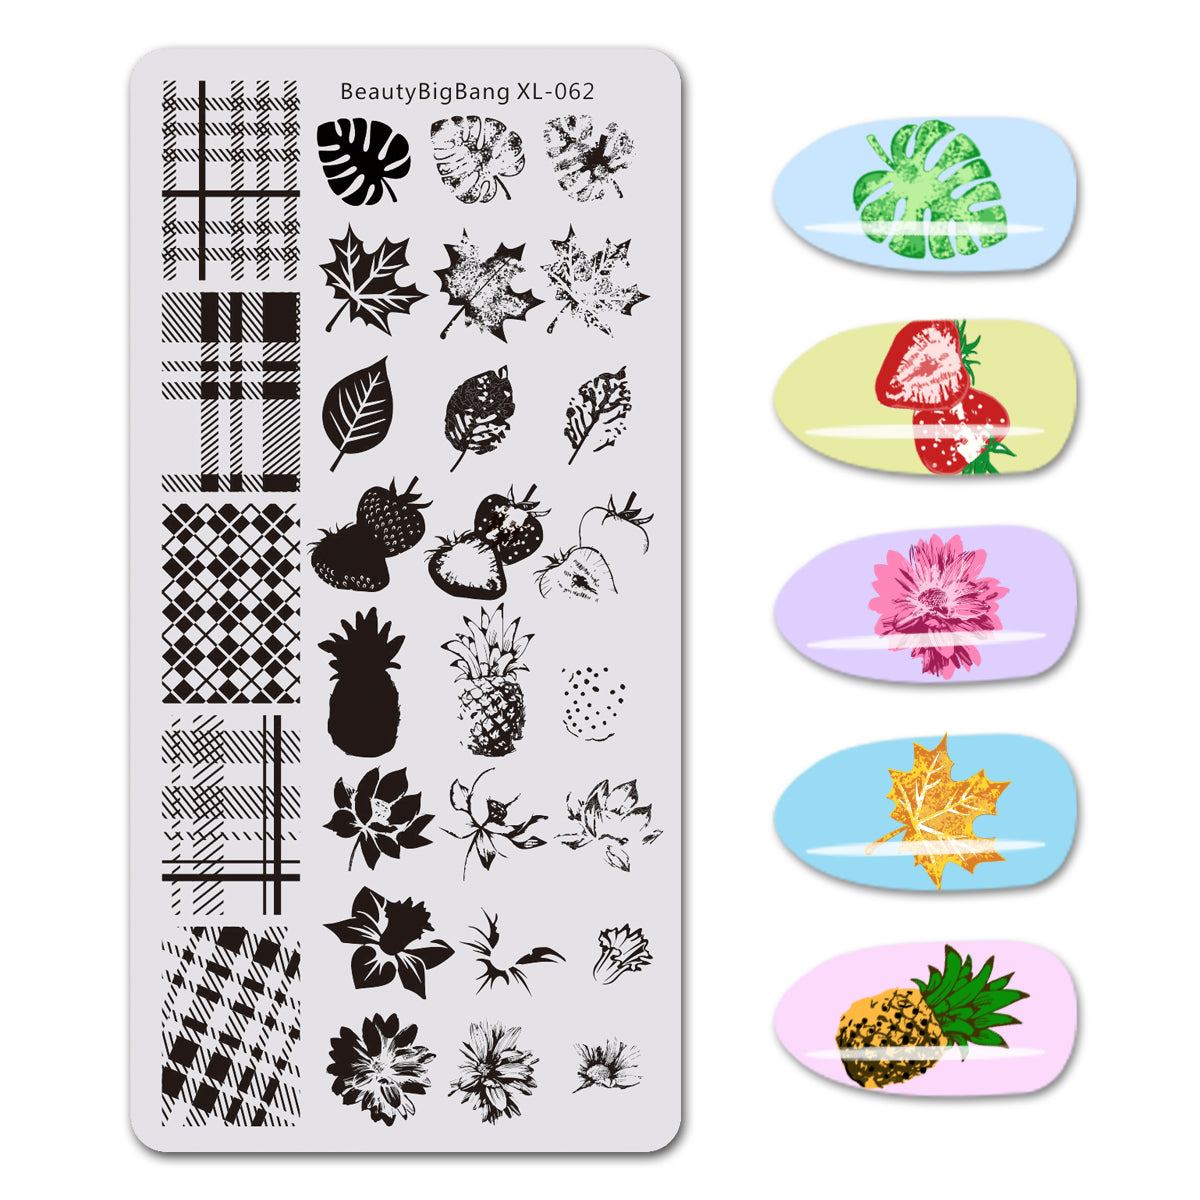 Plaid Theme Rectangle Nail Art Stamping Plate Geometry Design